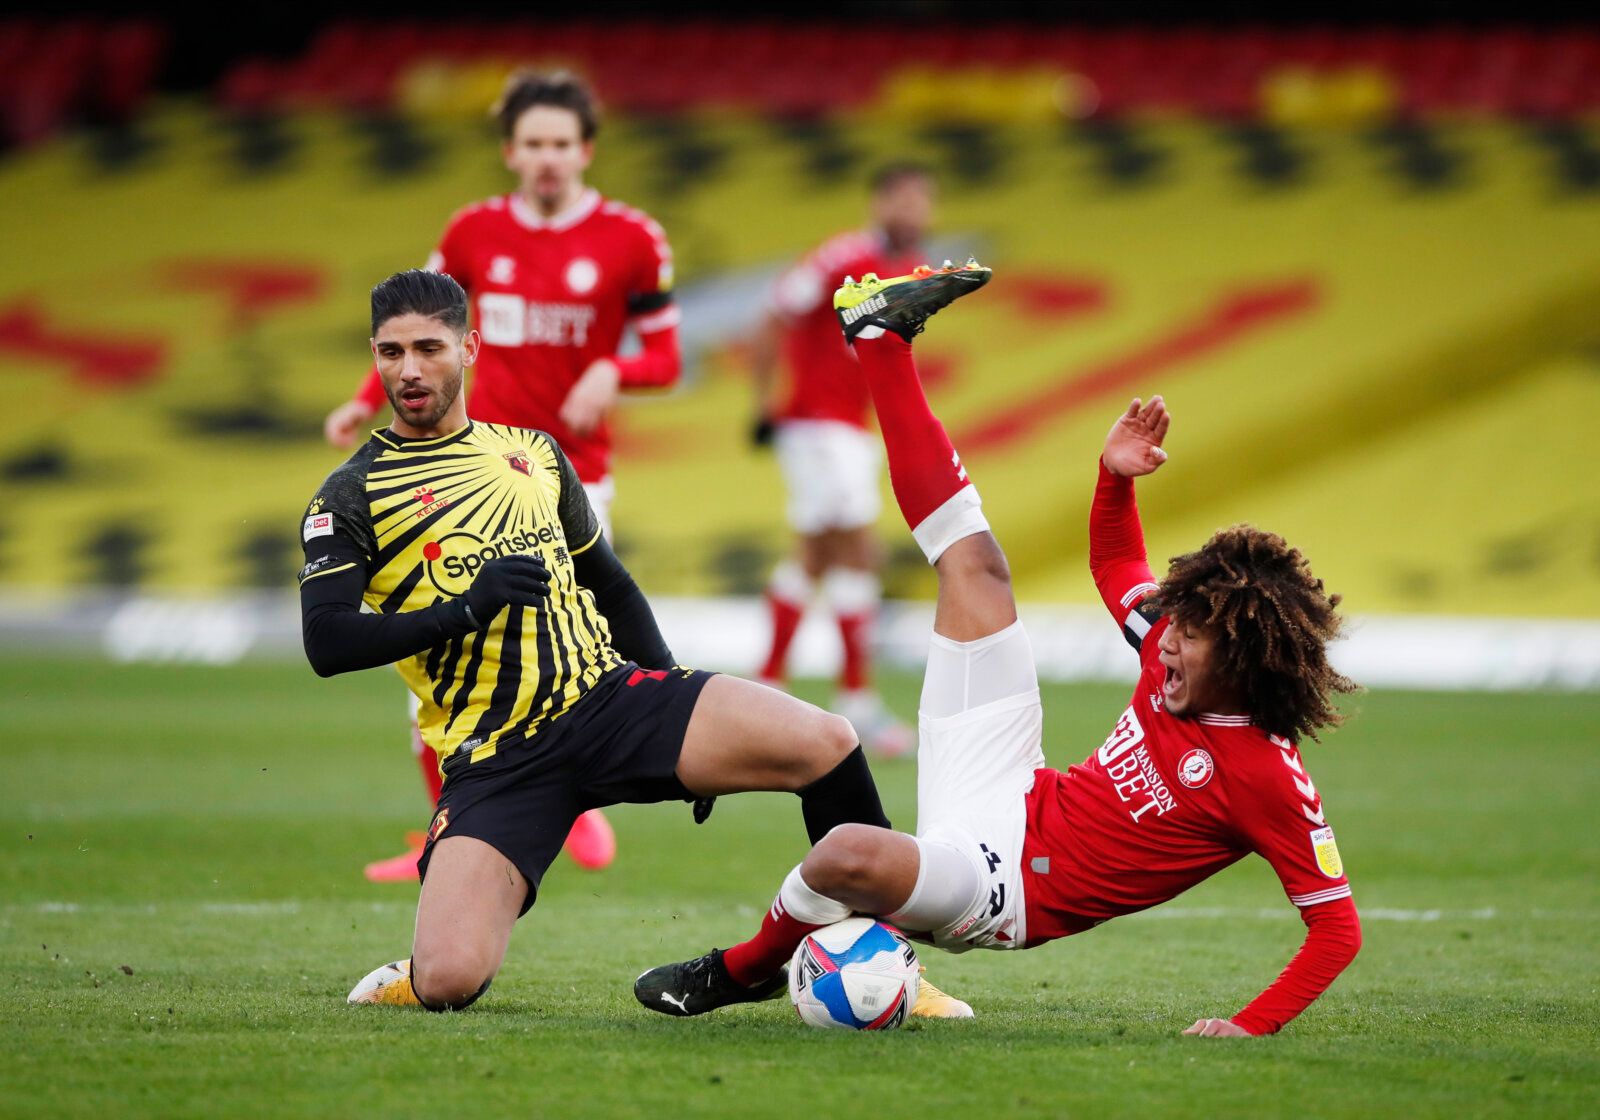 Soccer Football - Championship - Watford v Bristol City - Vicarage Road, Watford, Britain - February 13, 2021 Watford's Achraf Lazaar and Bristol City's Han-Noah Massengo Action Images/Paul Childs EDITORIAL USE ONLY. No use with unauthorized audio, video, data, fixture lists, club/league logos or 'live' services. Online in-match use limited to 75 images, no video emulation. No use in betting, games or single club /league/player publications.  Please contact your account representative for furthe